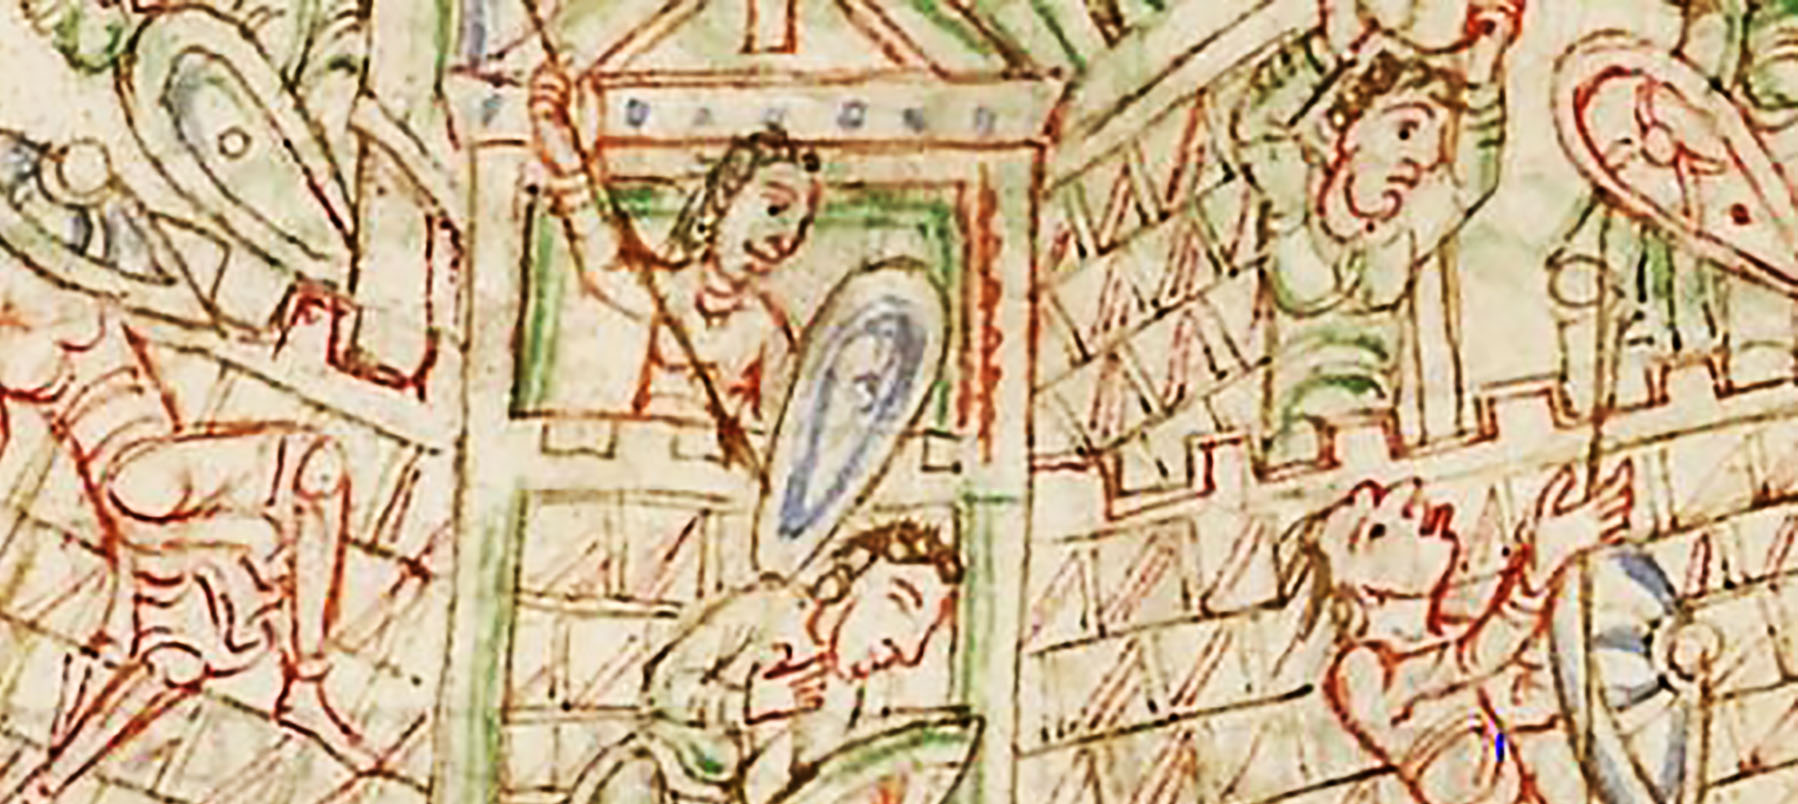 medieval research at Winchester: image of medieval warfare